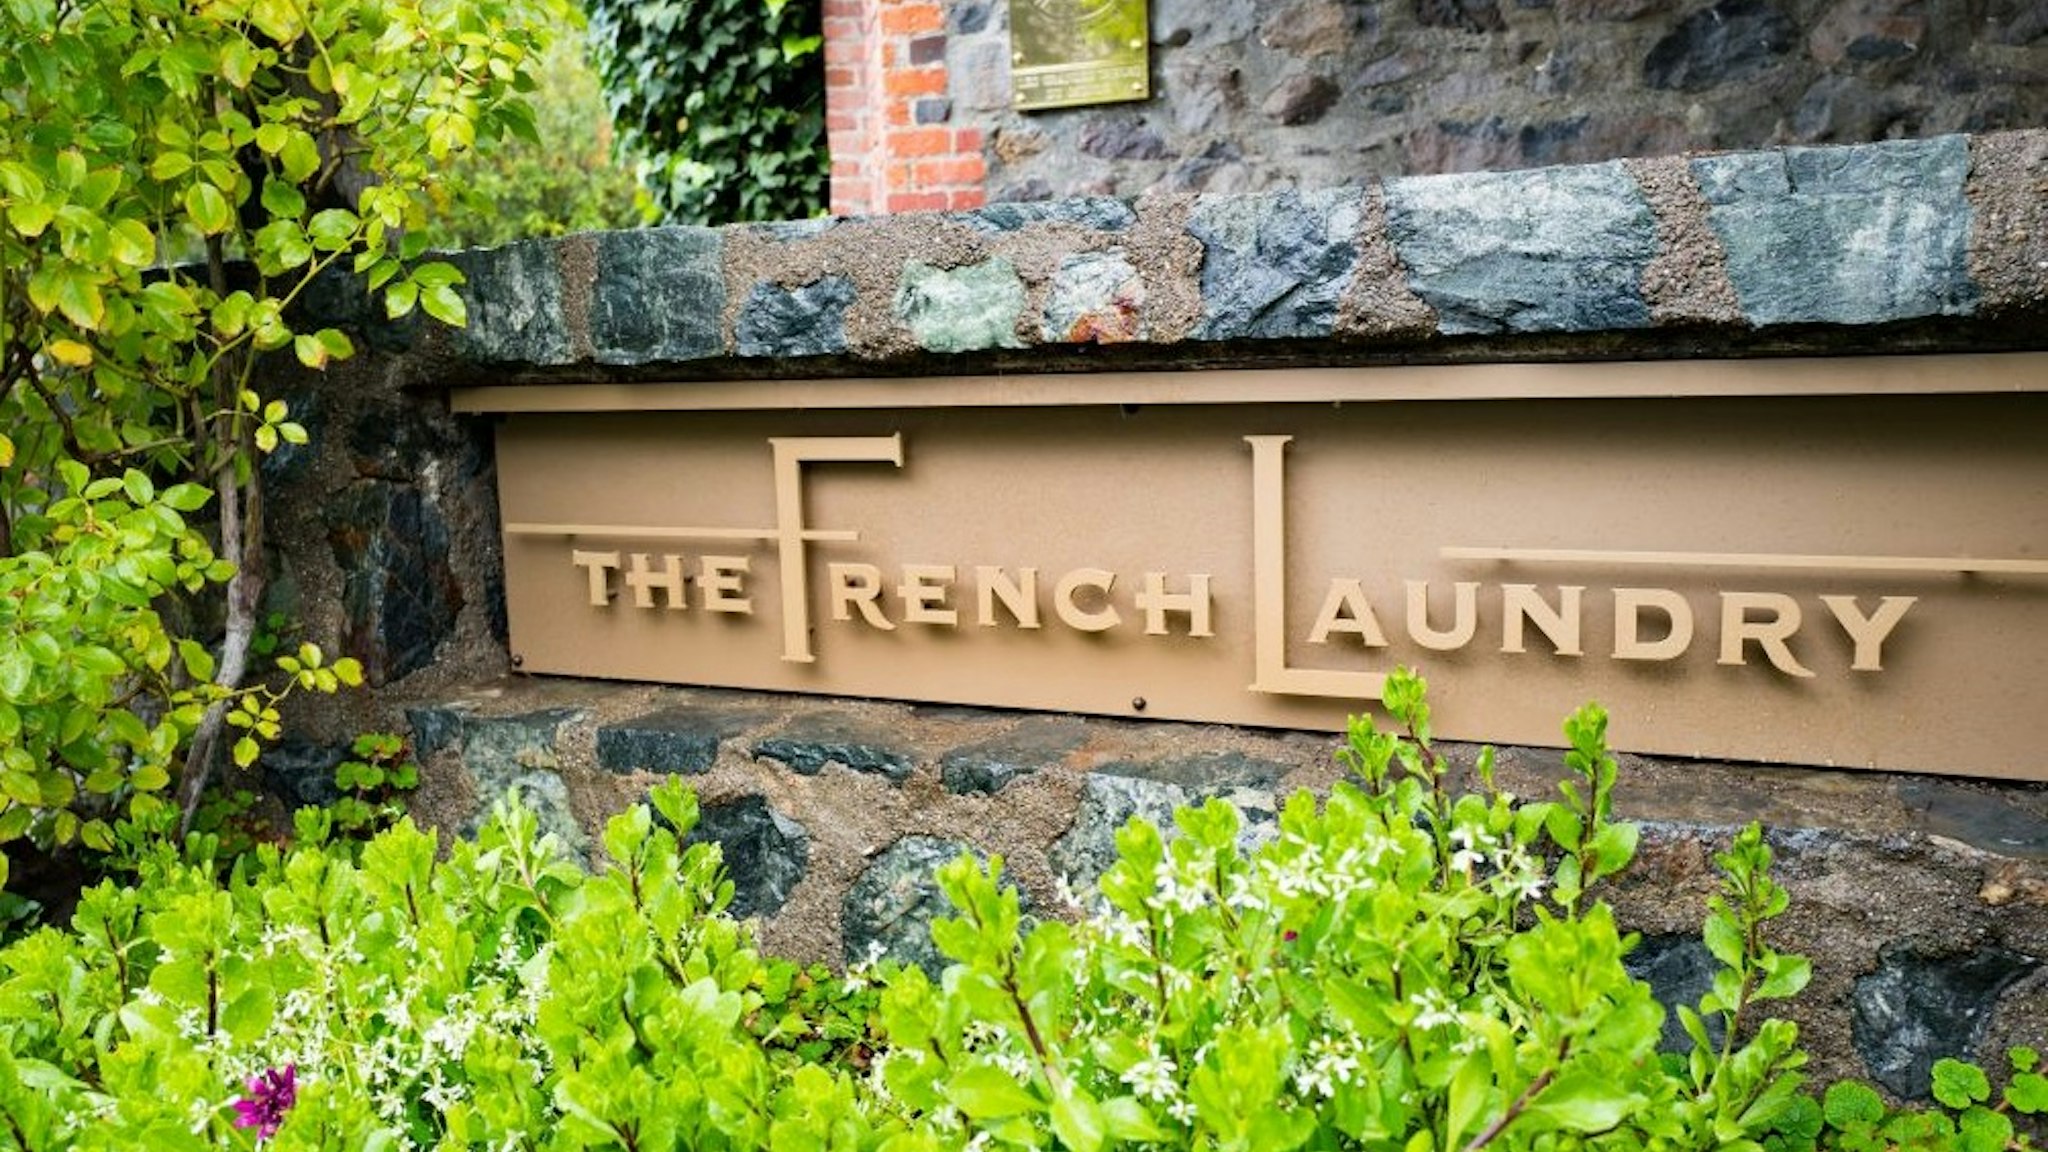 Signage for the French Laundry restaurant in Yountville, Napa Valley, California, operated by chef Thomas Keller and known for being one of the few restaurants in the United States to earn three Michelin stars, November 26, 2016.